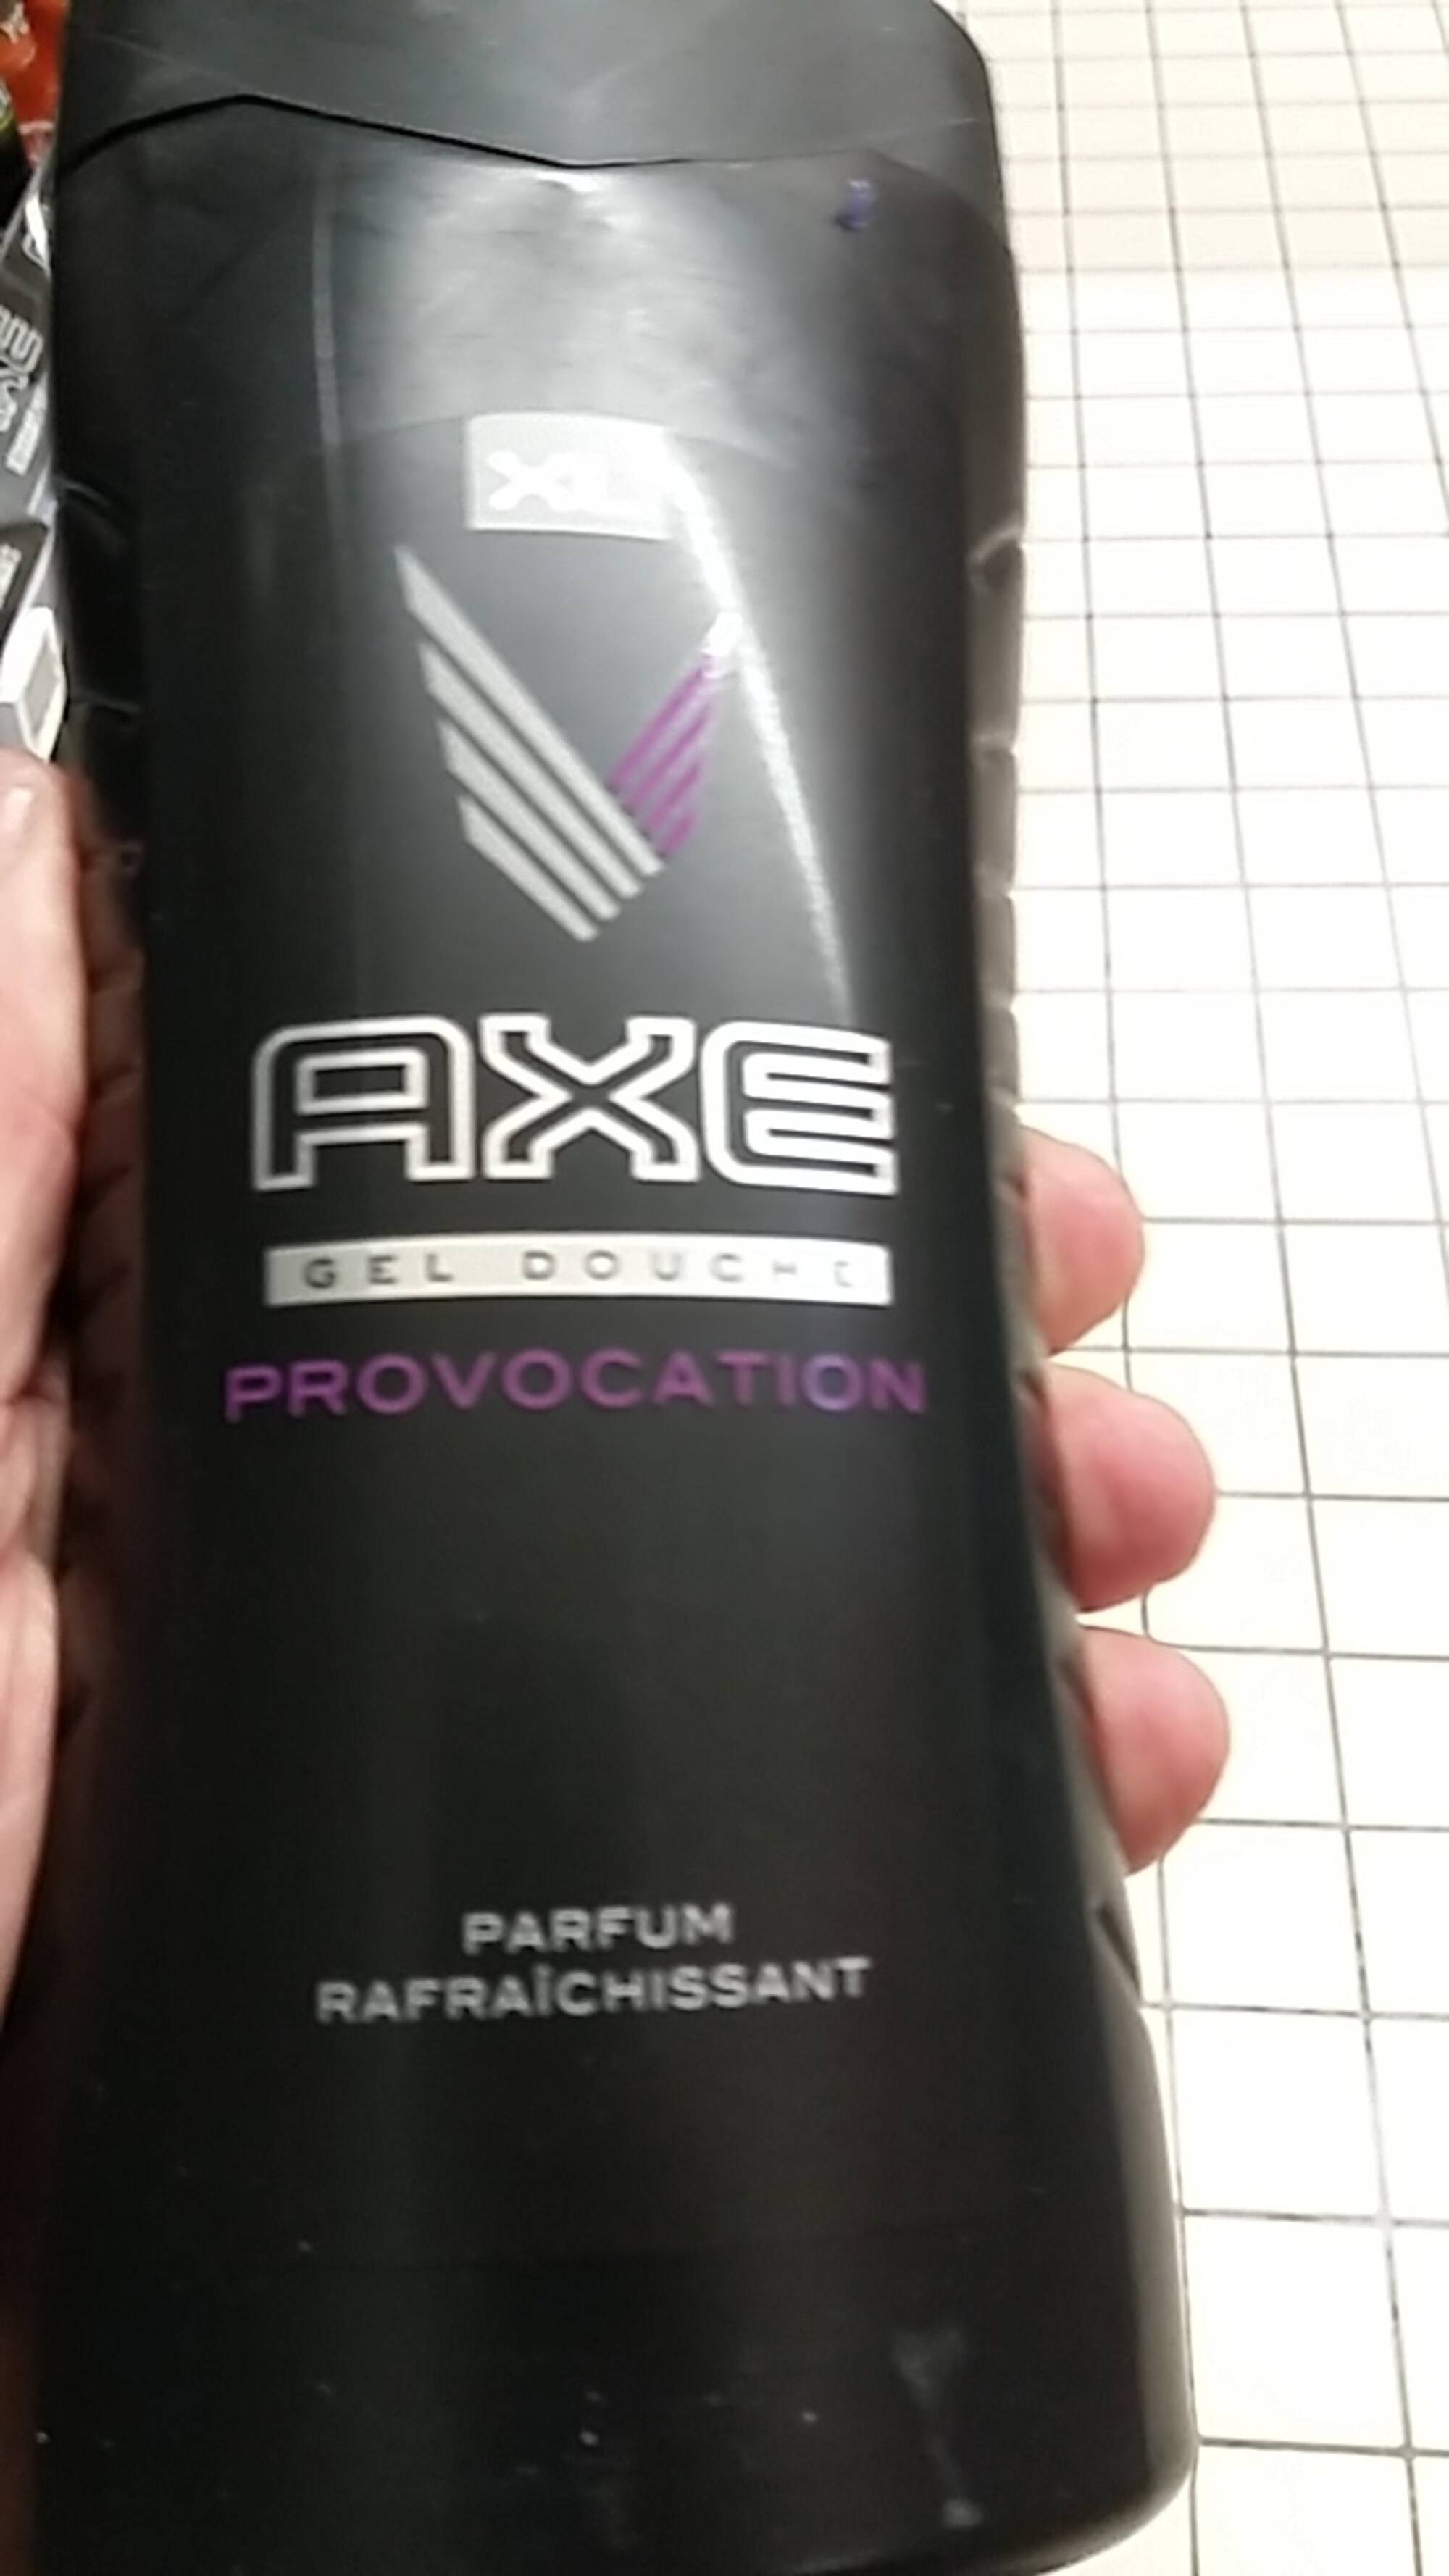 AXE - Gel douche Provocation